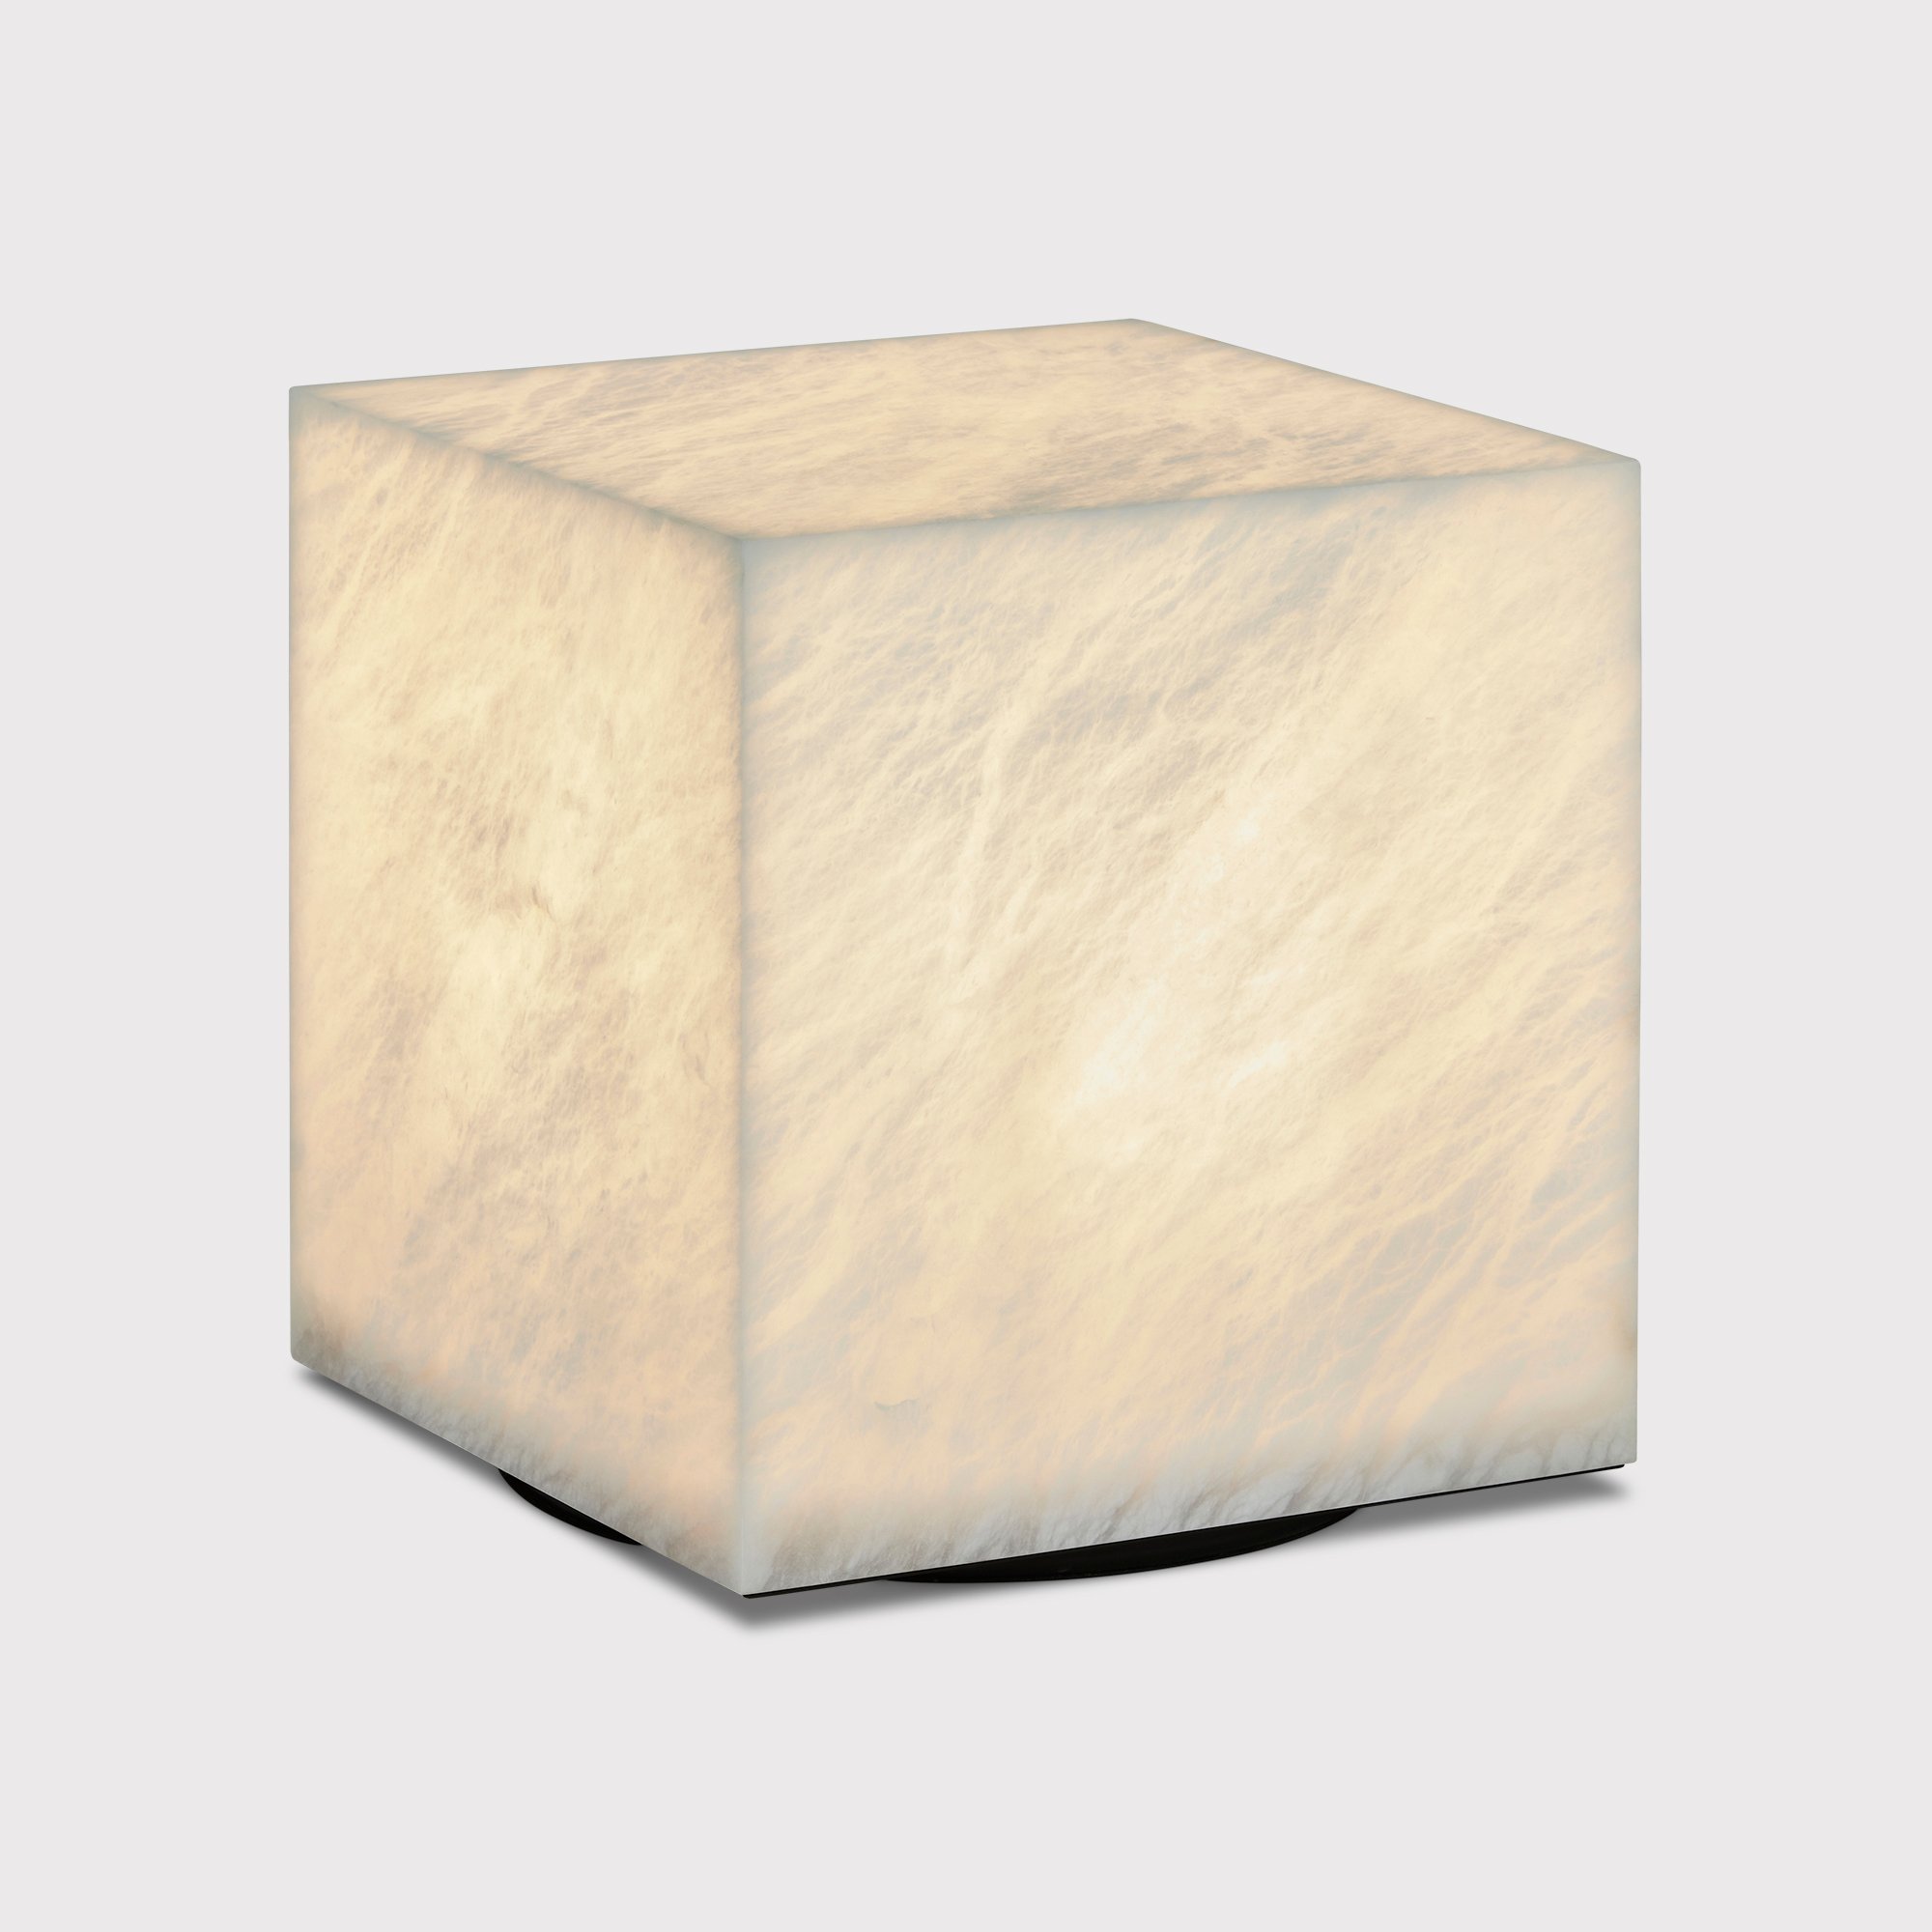 Timothy Oulton Alabaster Cube Side Table 50cm, Neutral Stone | Barker & Stonehouse